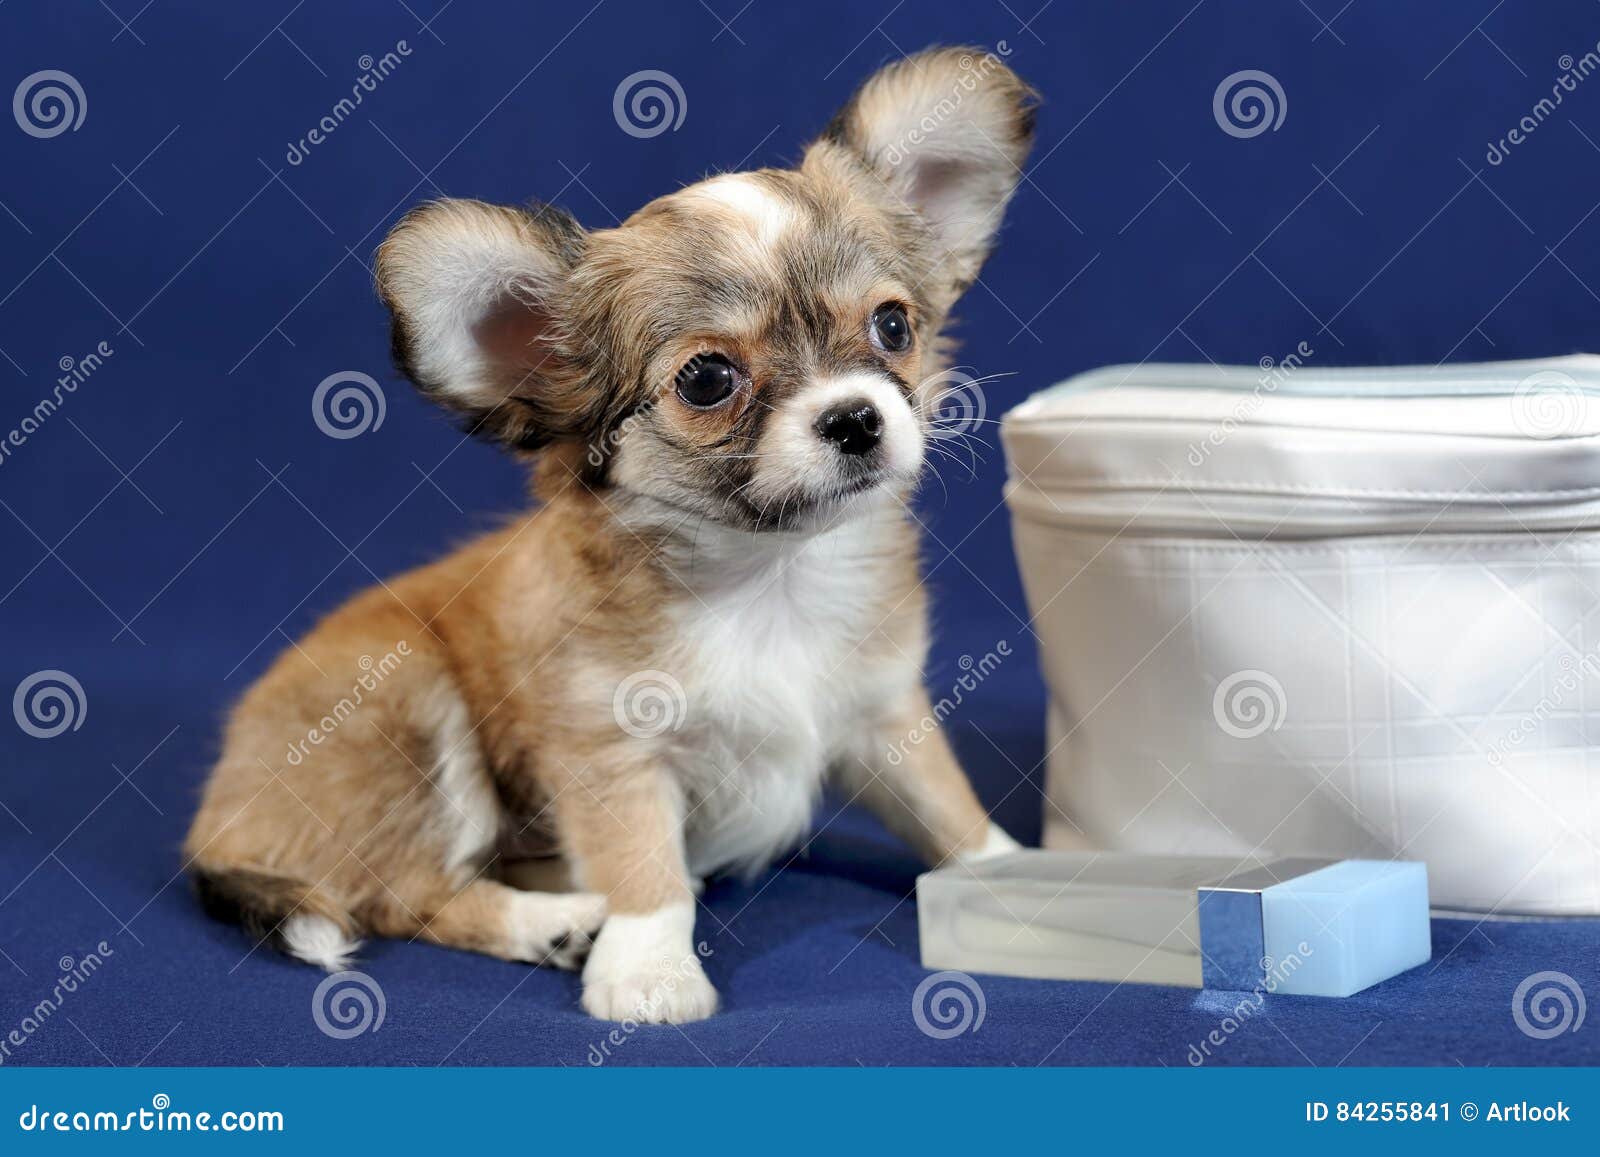 47 HQ Images Long Haired Blue Chihuahua / Long Hair Chihuahua Or Mexican Dog Close Up On Blue Blanket Stock Photo Alamy